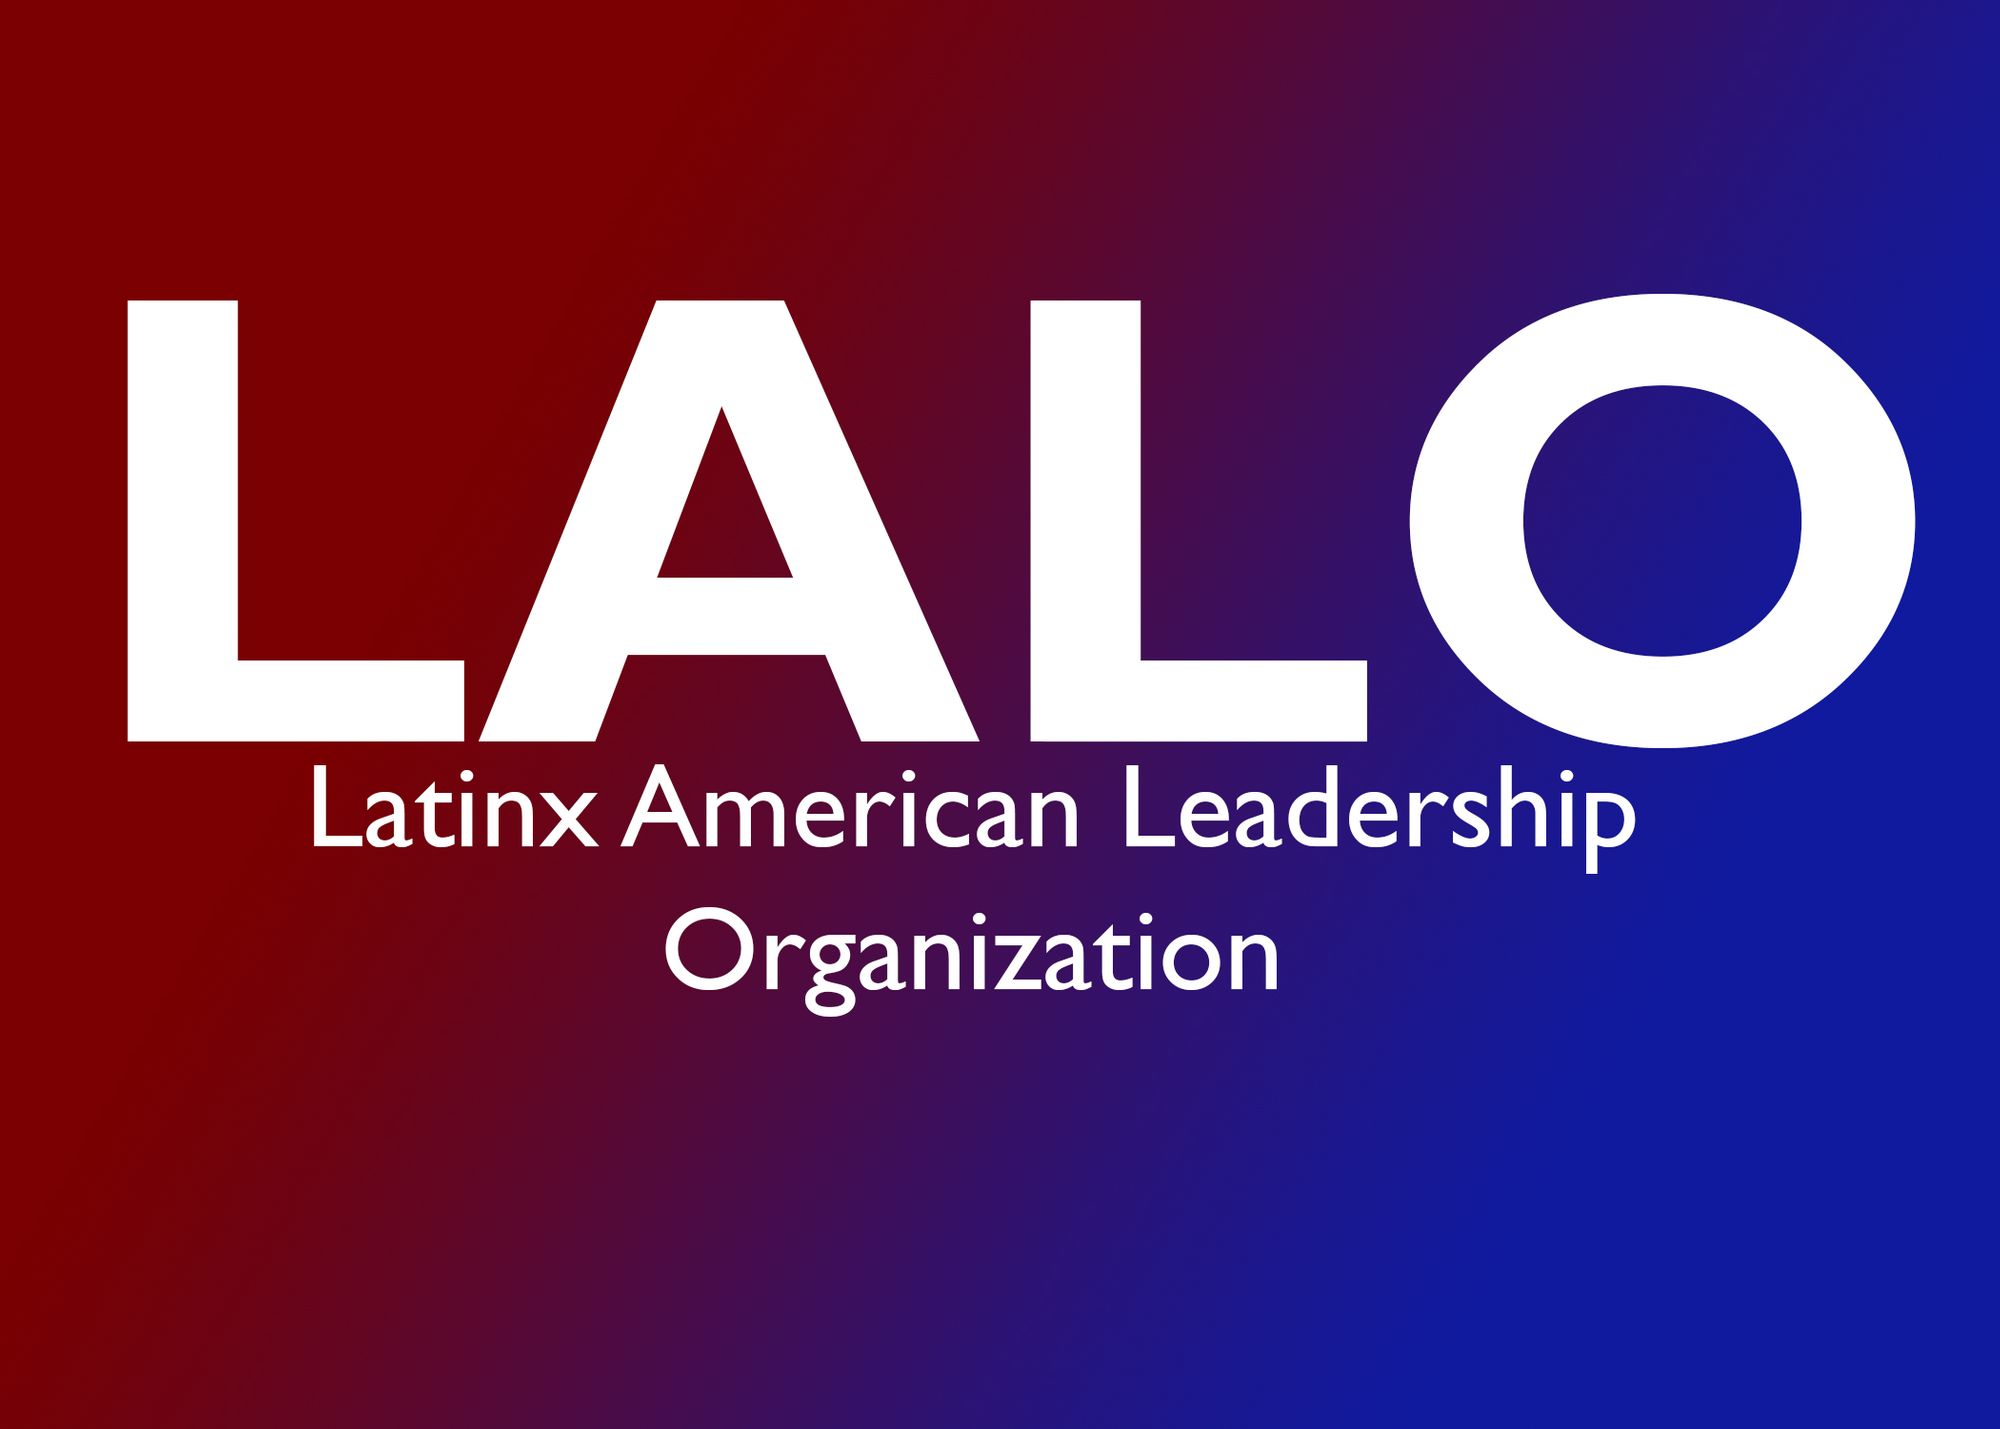 HALO to LALO: Cultural club changes name